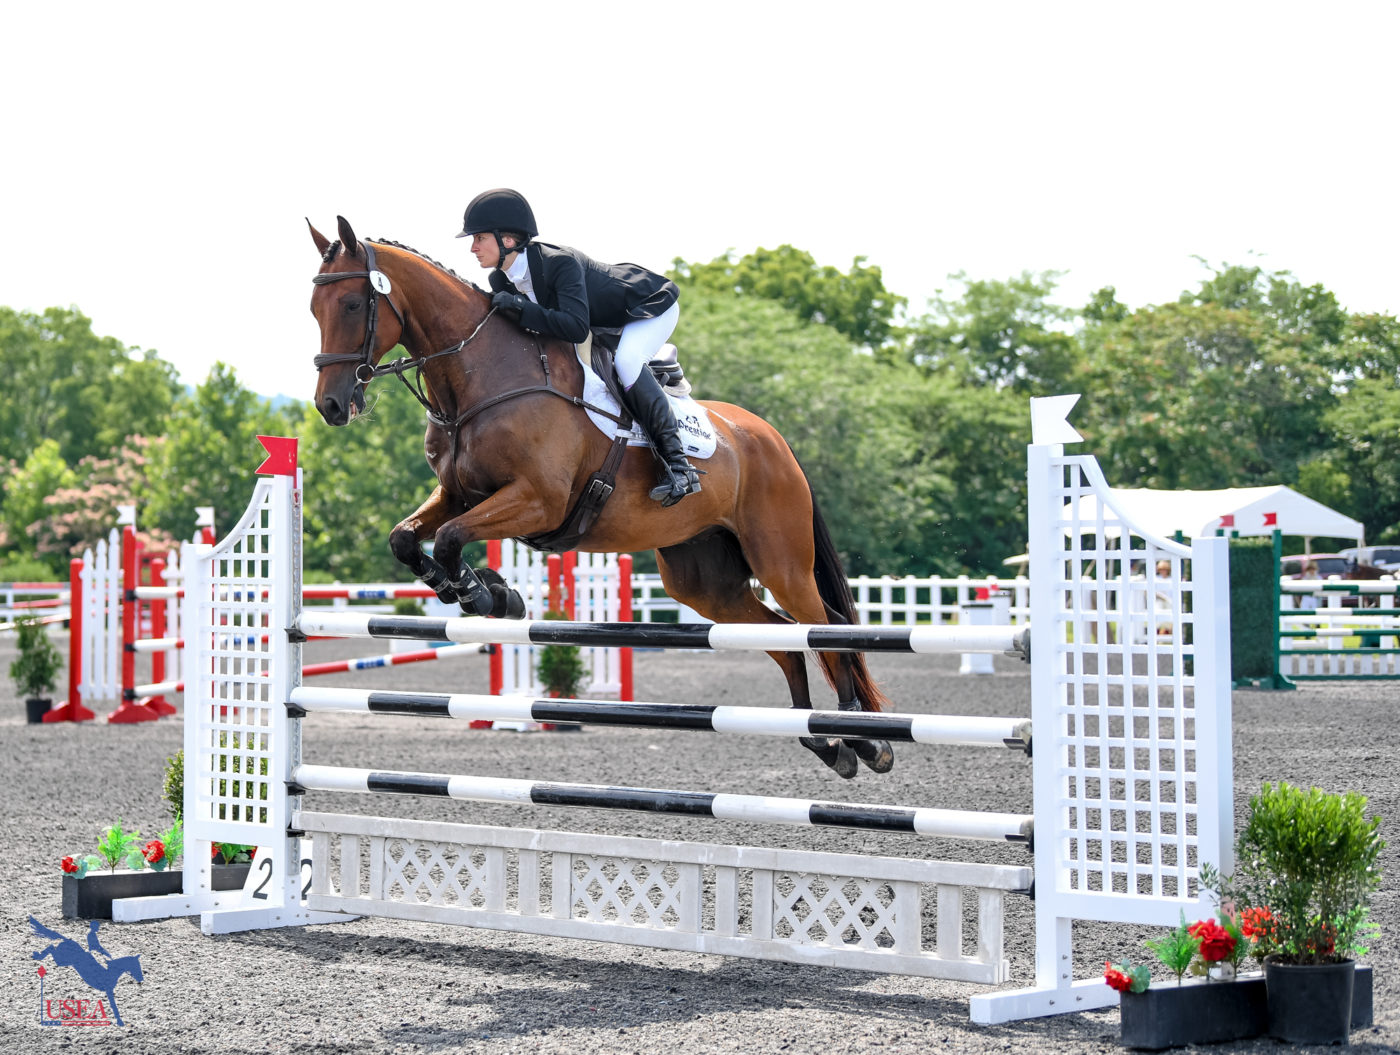 Alexandra MacLeod and Newmarket Jack in are fifth place. USEA/Lindsay Berreth photo